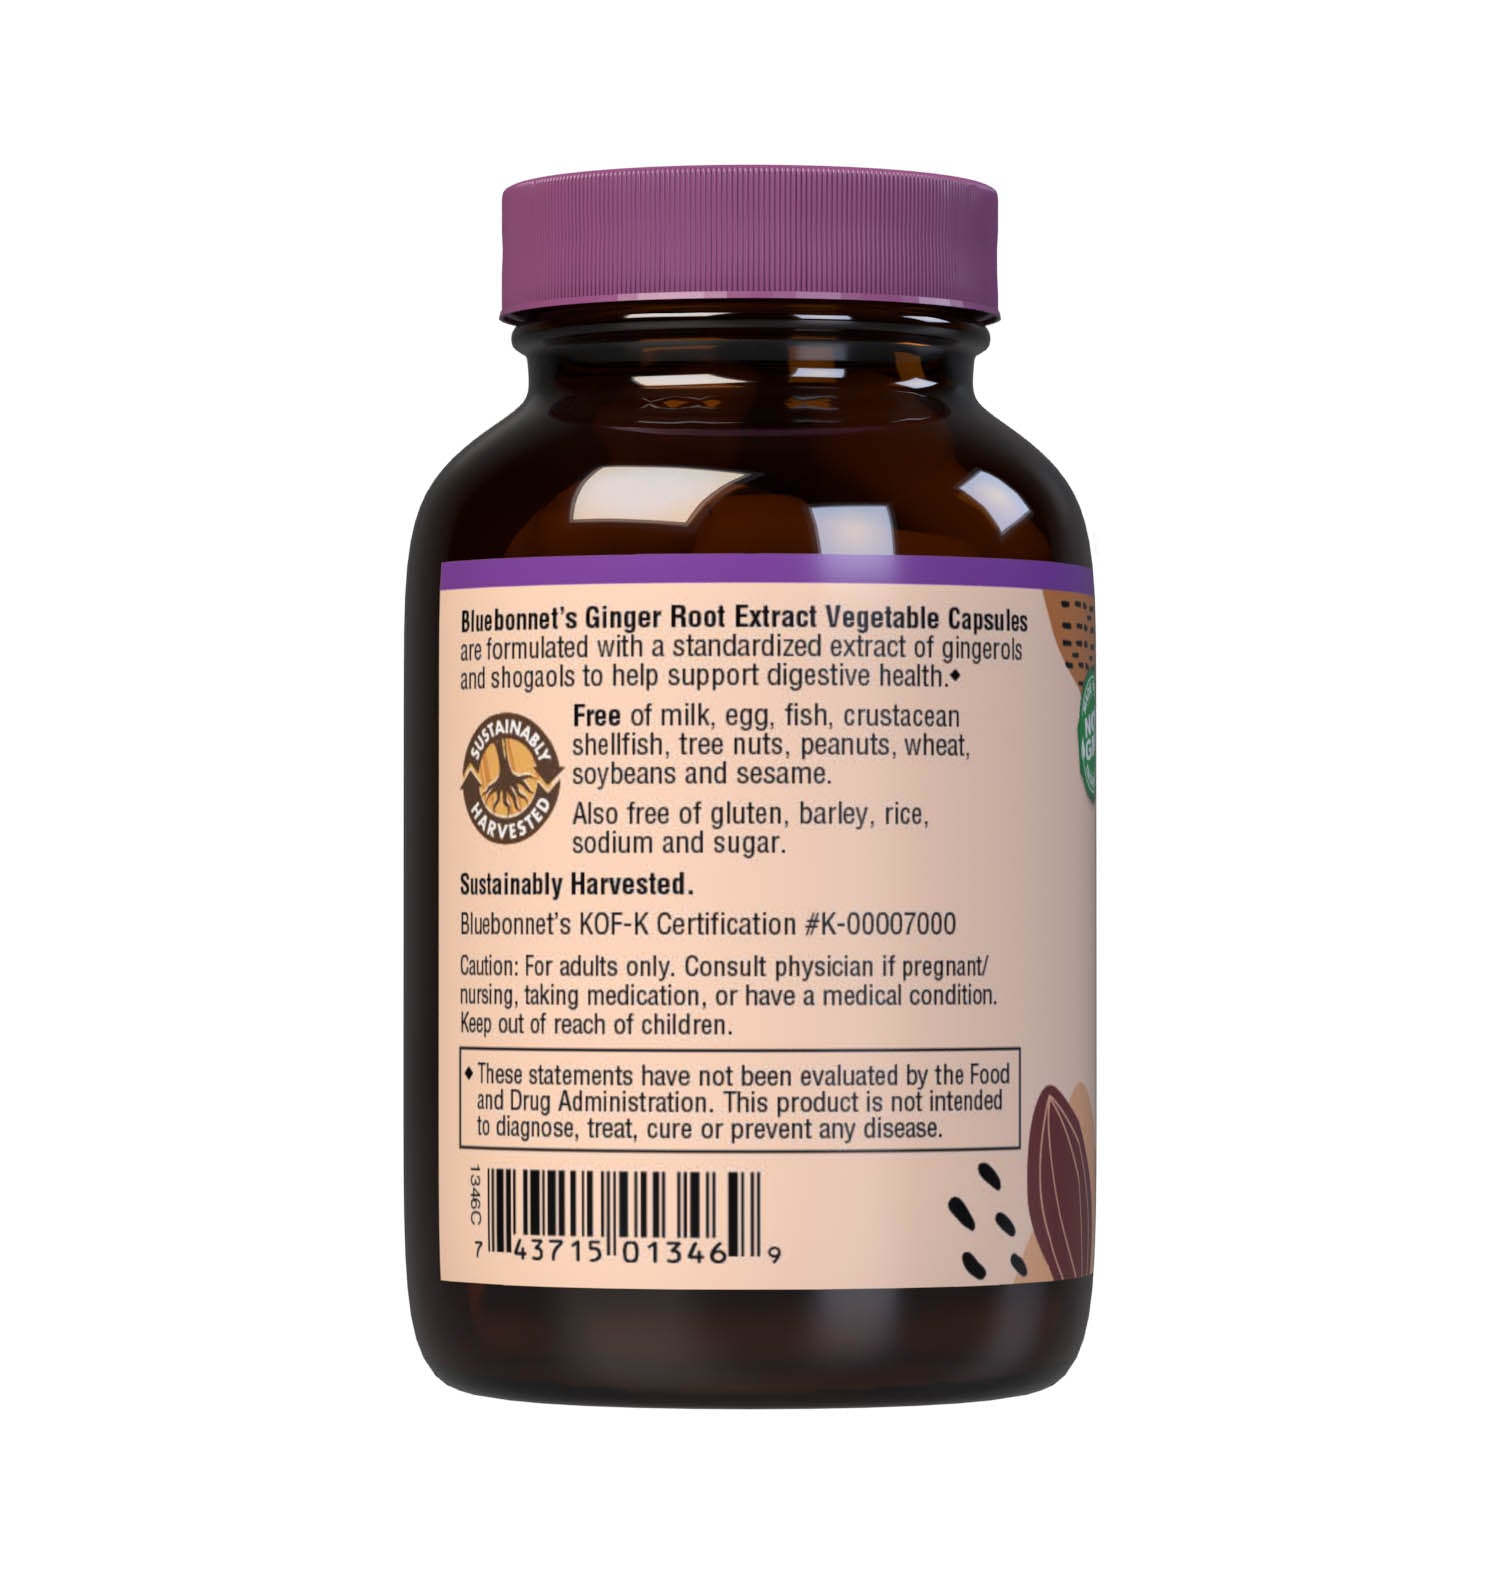 Bluebonnet’s Ginger Root Extract 60 Vegetable Capsules contain a standardized extract of gingerols and shogaols, the most researched active constituents found in ginger. A clean and gentle water-based extraction method is employed to capture and preserve ginger’s most valuable components. Description panel. #size_60 count